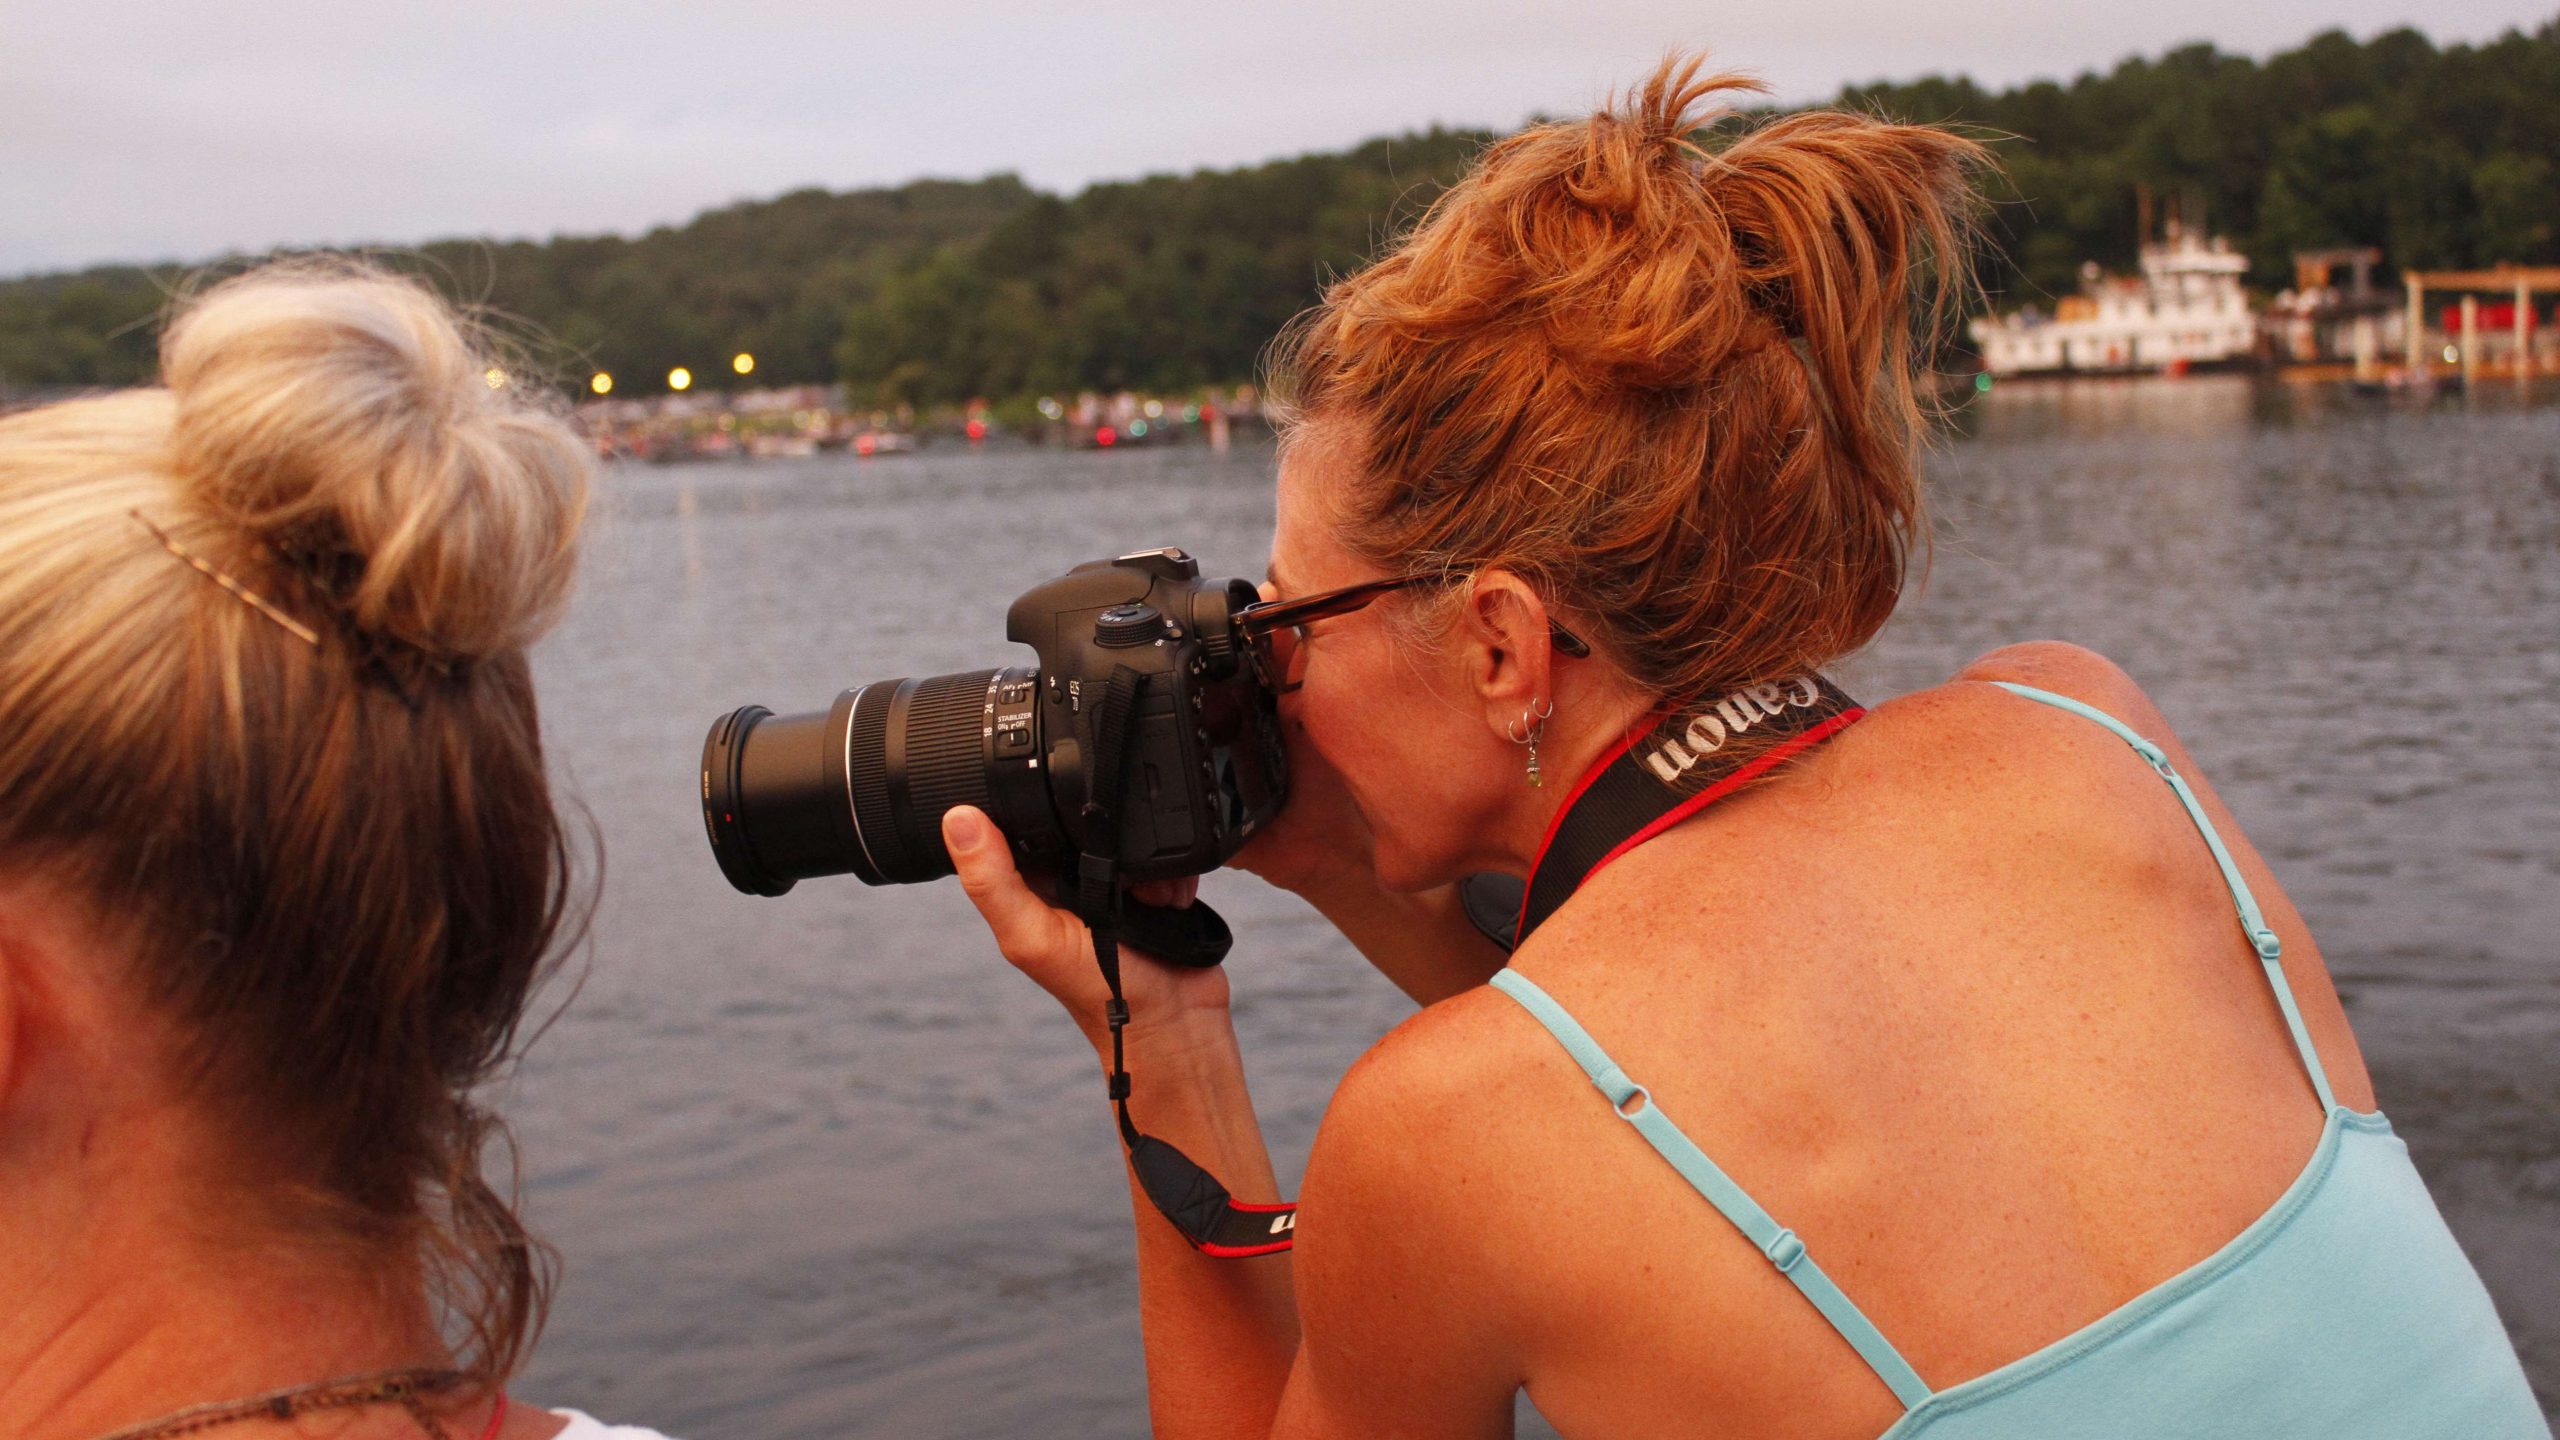 A female fan leans in for a shot of an angler.